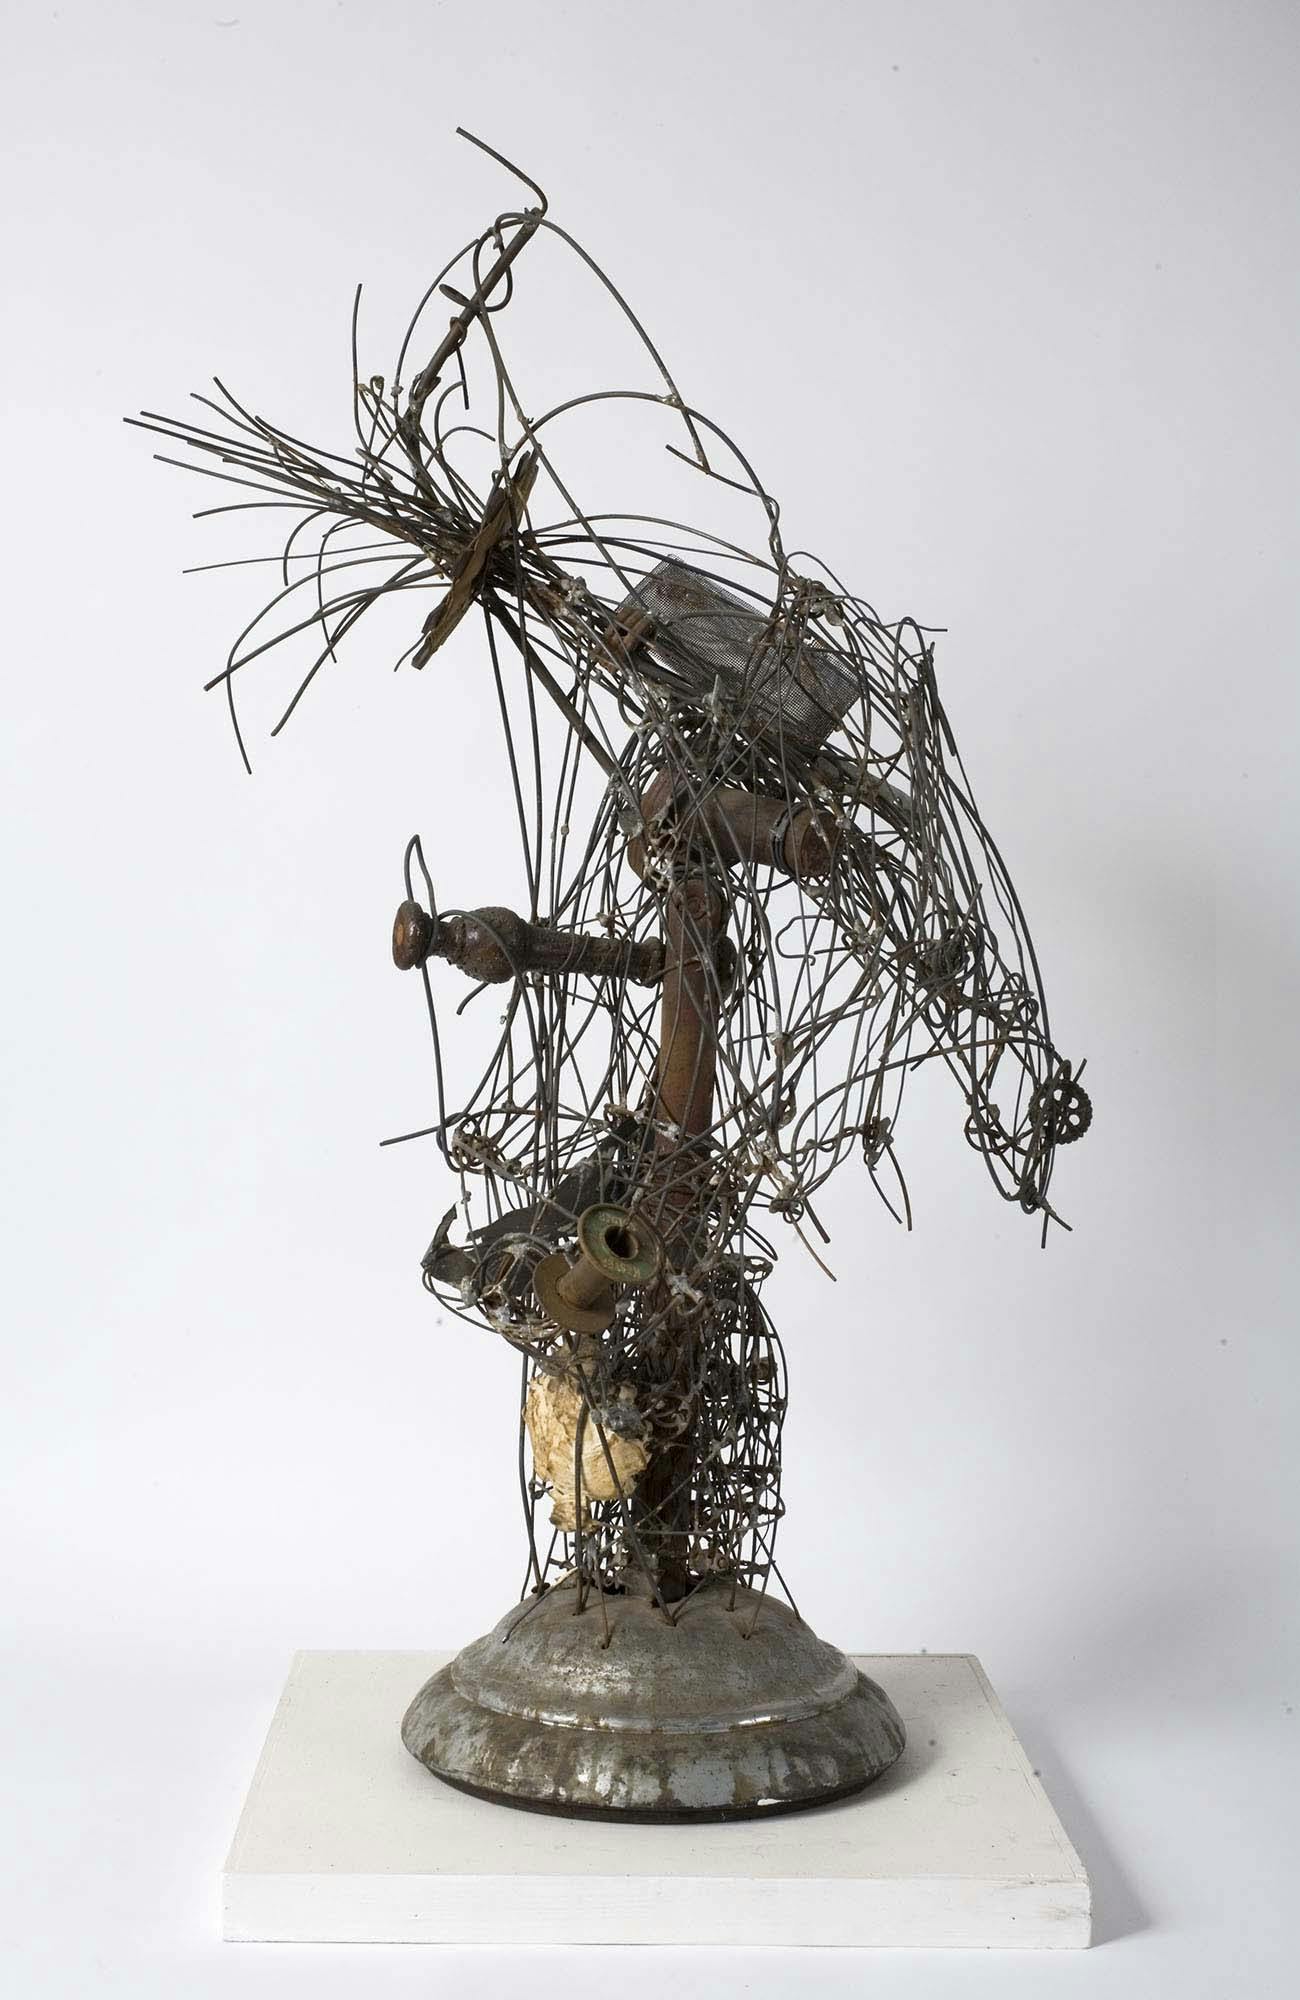 Sarabande
1950
 Steel wire and found objects
24 x 24 x 16 in. (61 x 61 x 40.6 cm)
 – The Richard Pousette-Dart Foundation